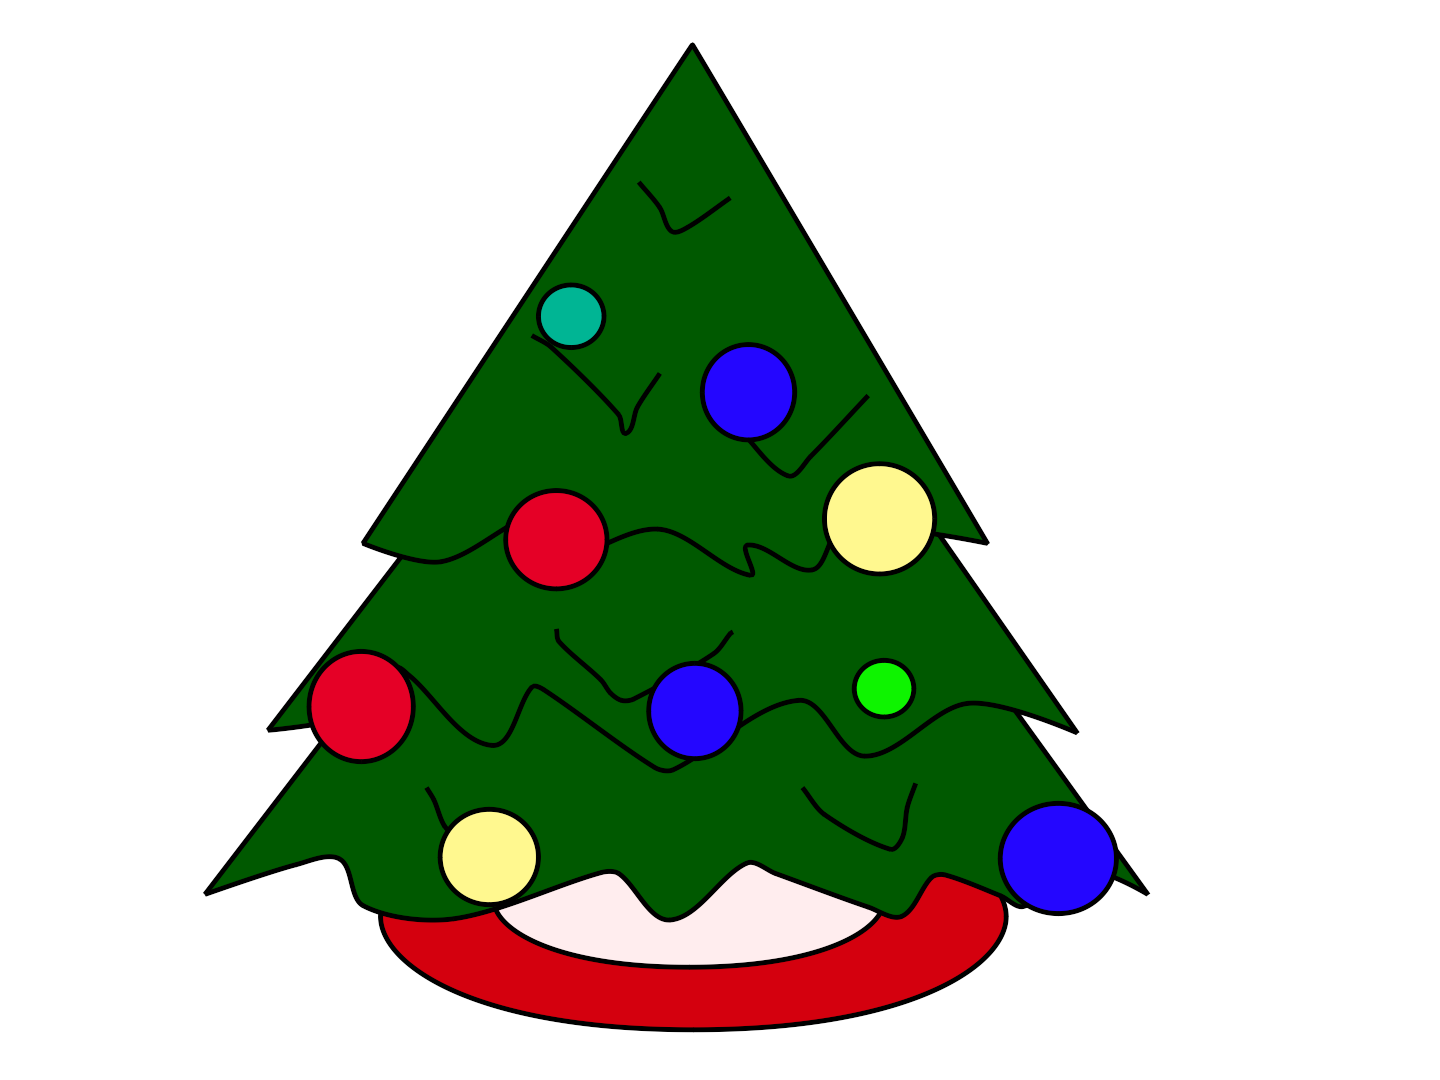 Anime Christmas Tree - Cartoon Trees for Christmas Day - ClipArt Best -  ClipArt Best